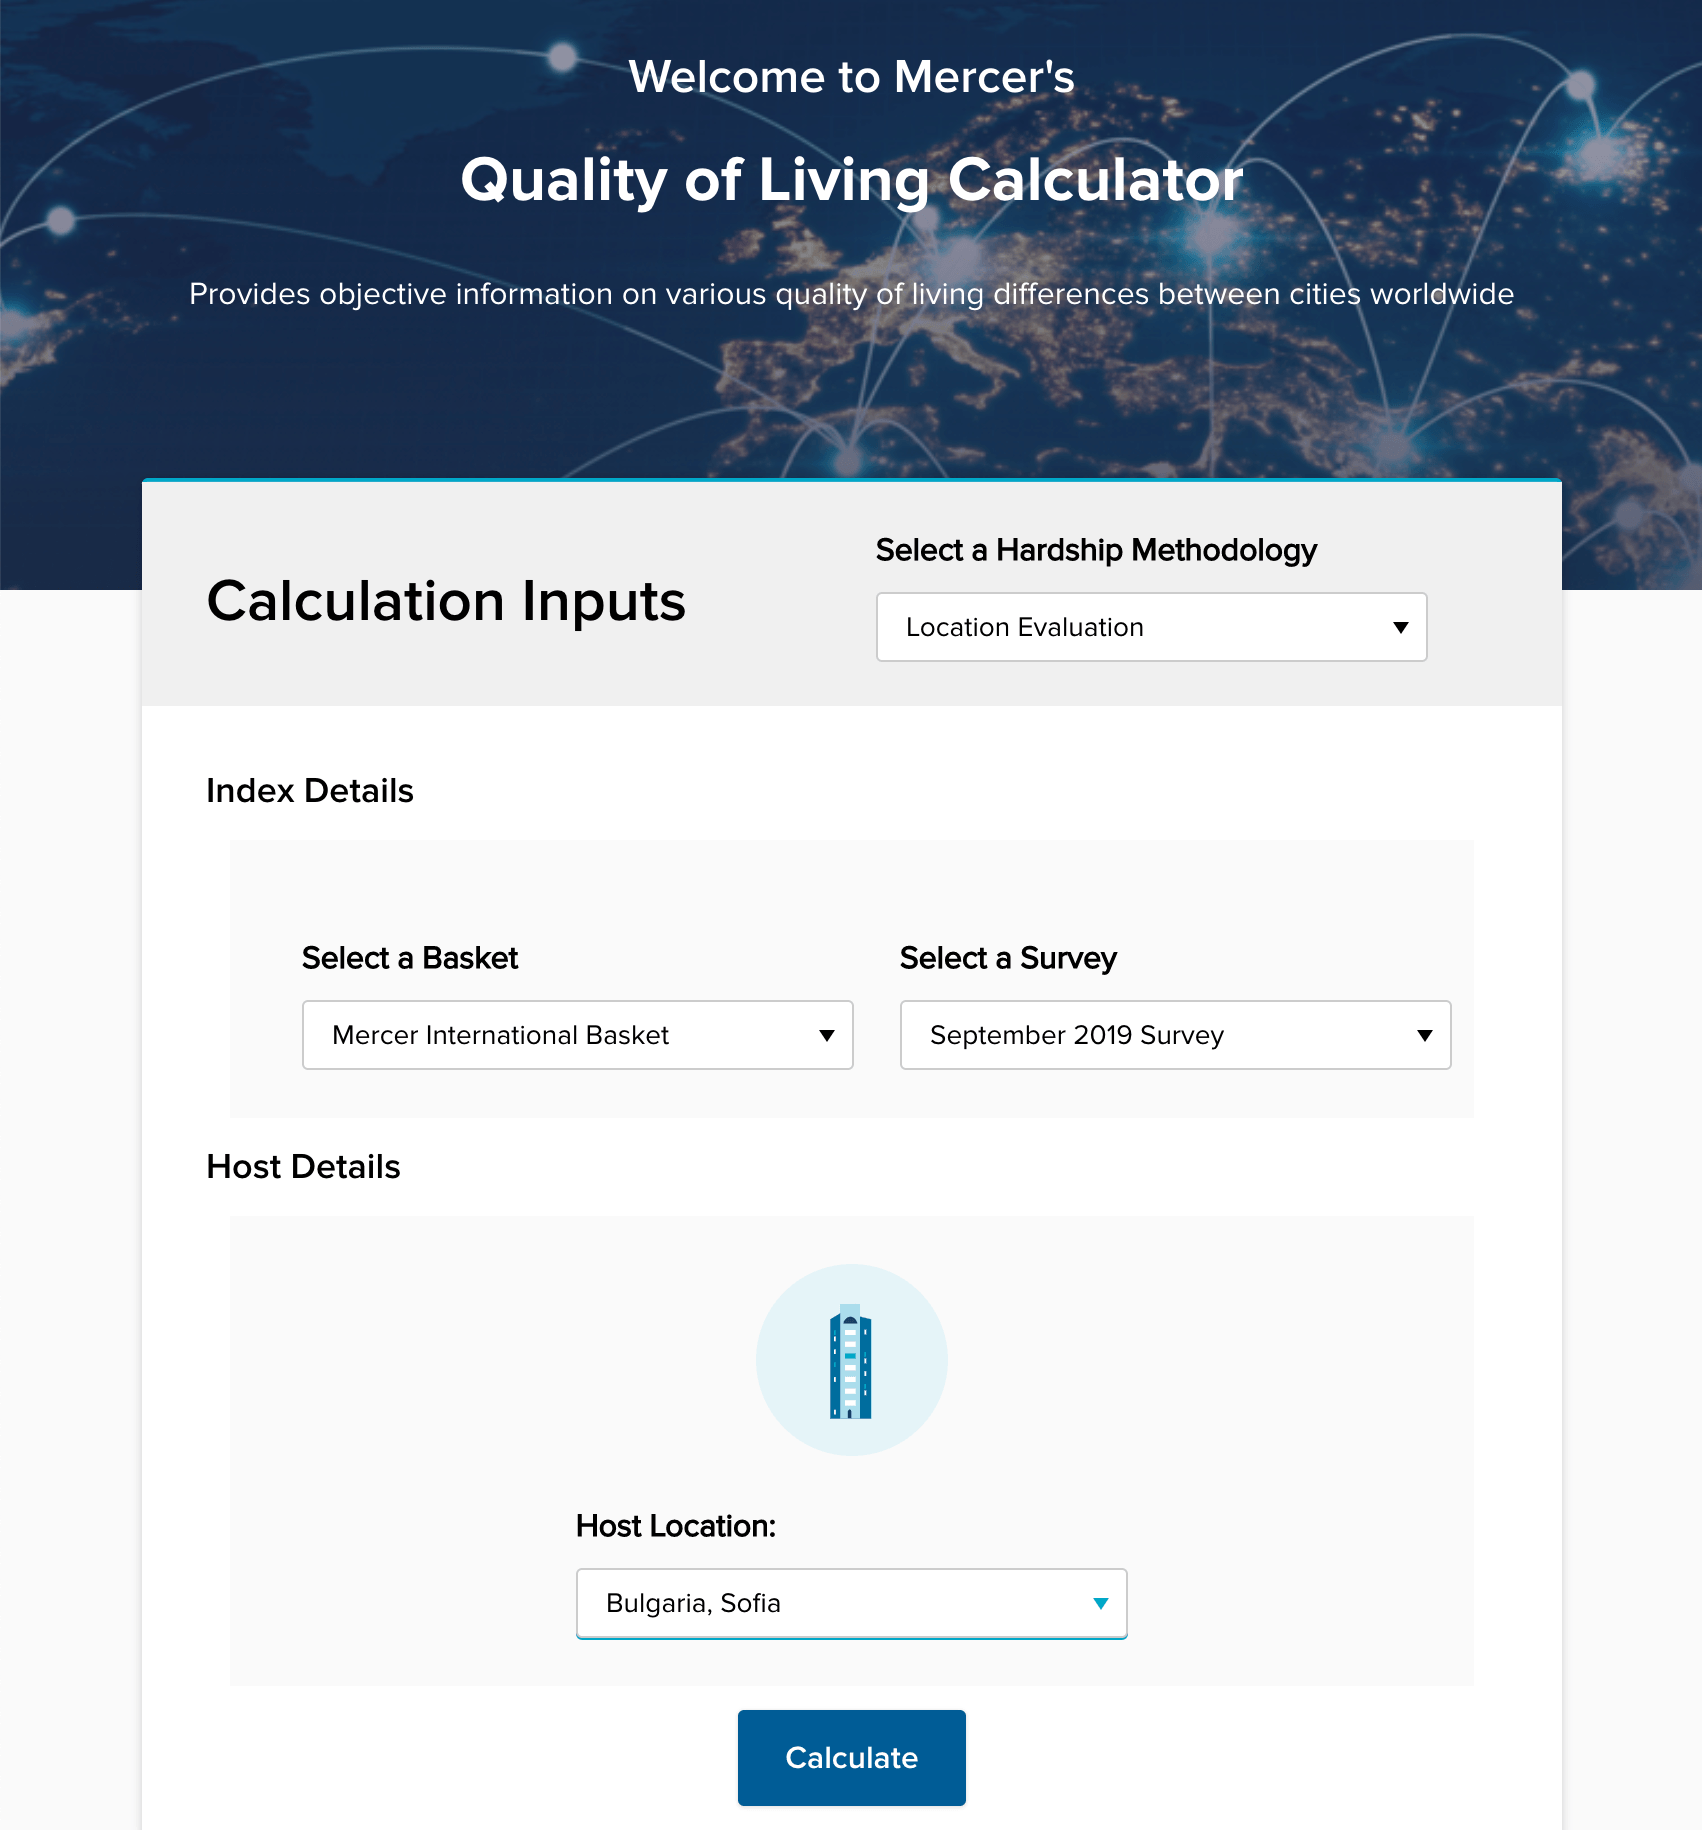 Quality of Living Calculator - Welcome screen